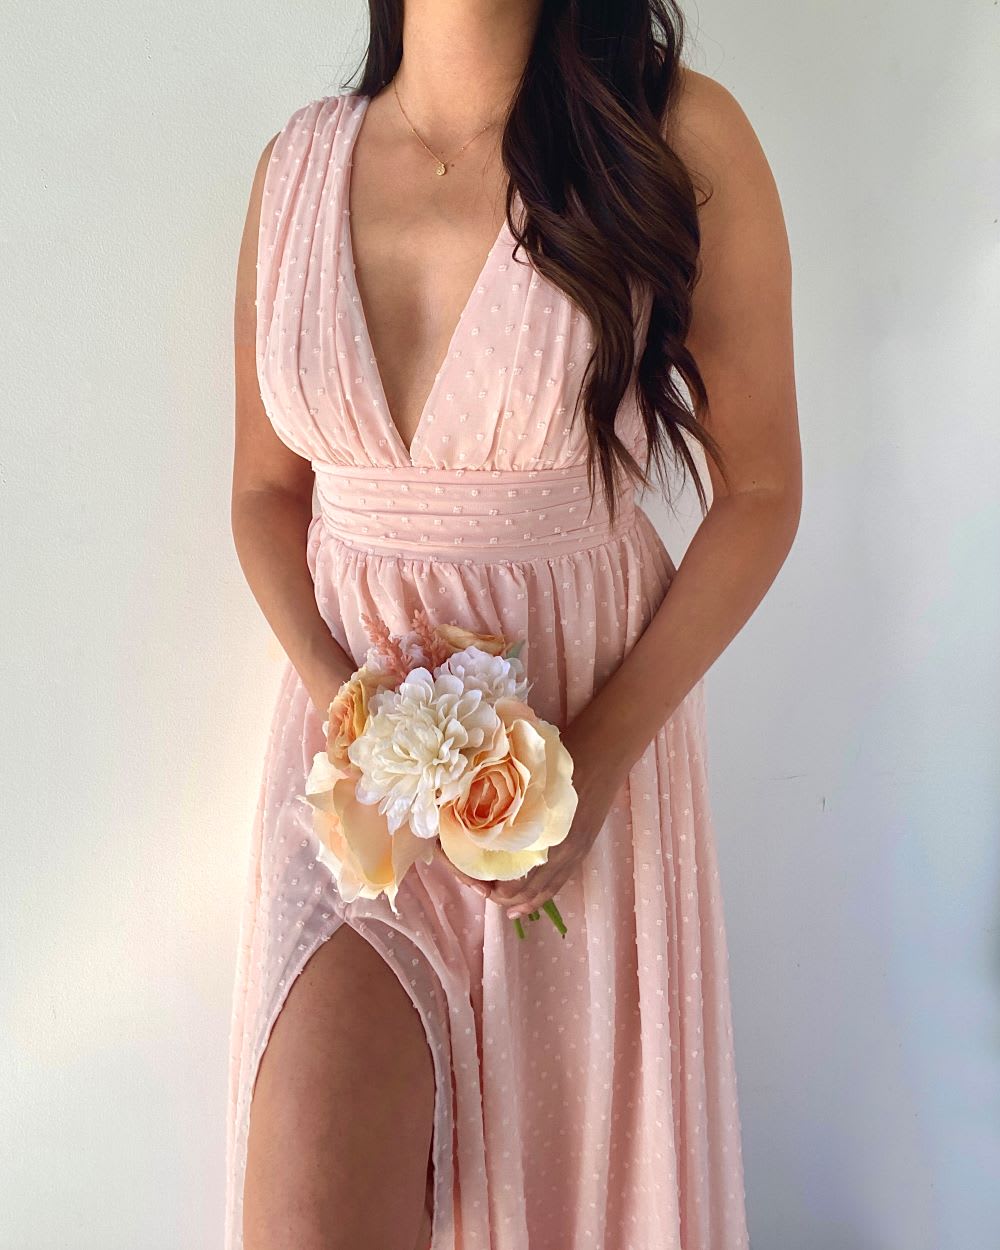 Here's How To Choose The Best Beach Bridesmaid Dresses - Lulus.com Fashion  Blog